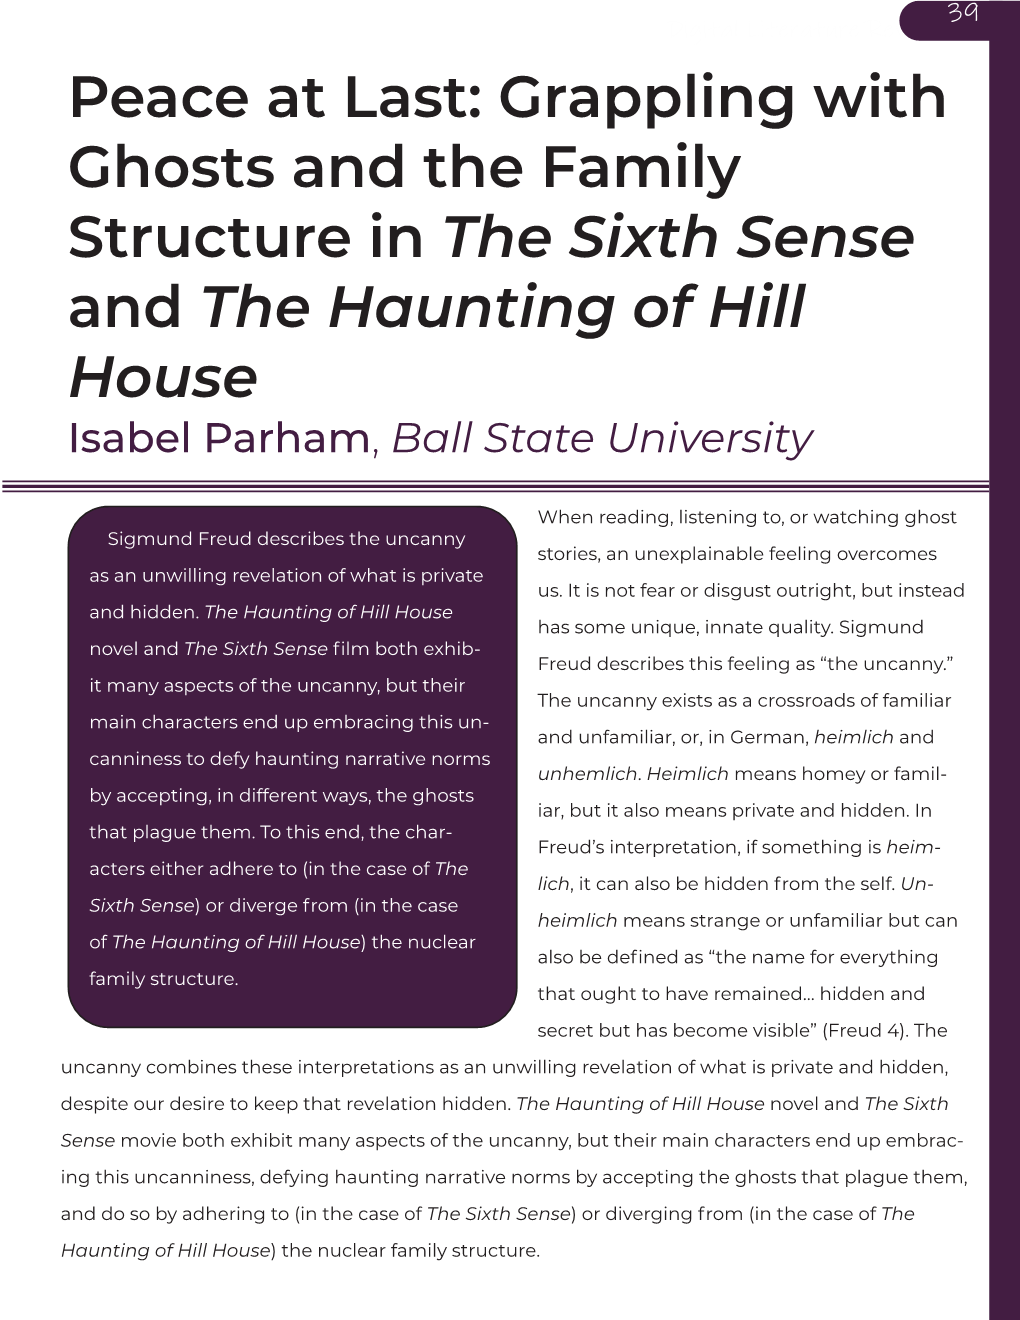 Grappling with Ghosts and the Family Structure in the Sixth Sense and the Haunting of Hill House Isabel Parham, Ball State University